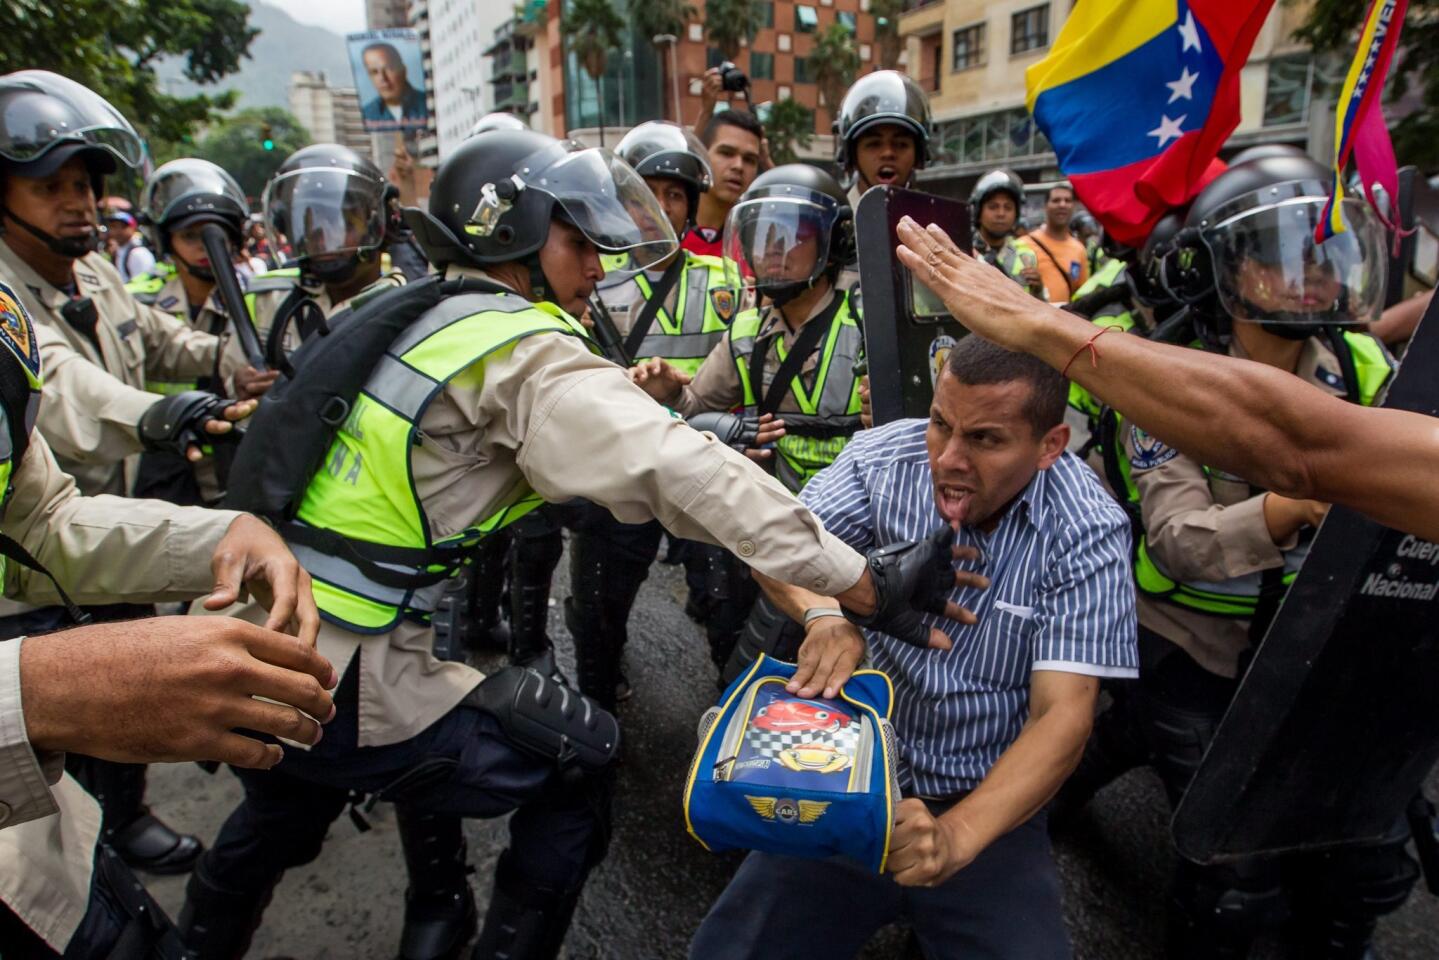 Demonstrators clash with police during a protest against Venezuelan President Nicolas Maduro's Government in Caracas, Venezuela.